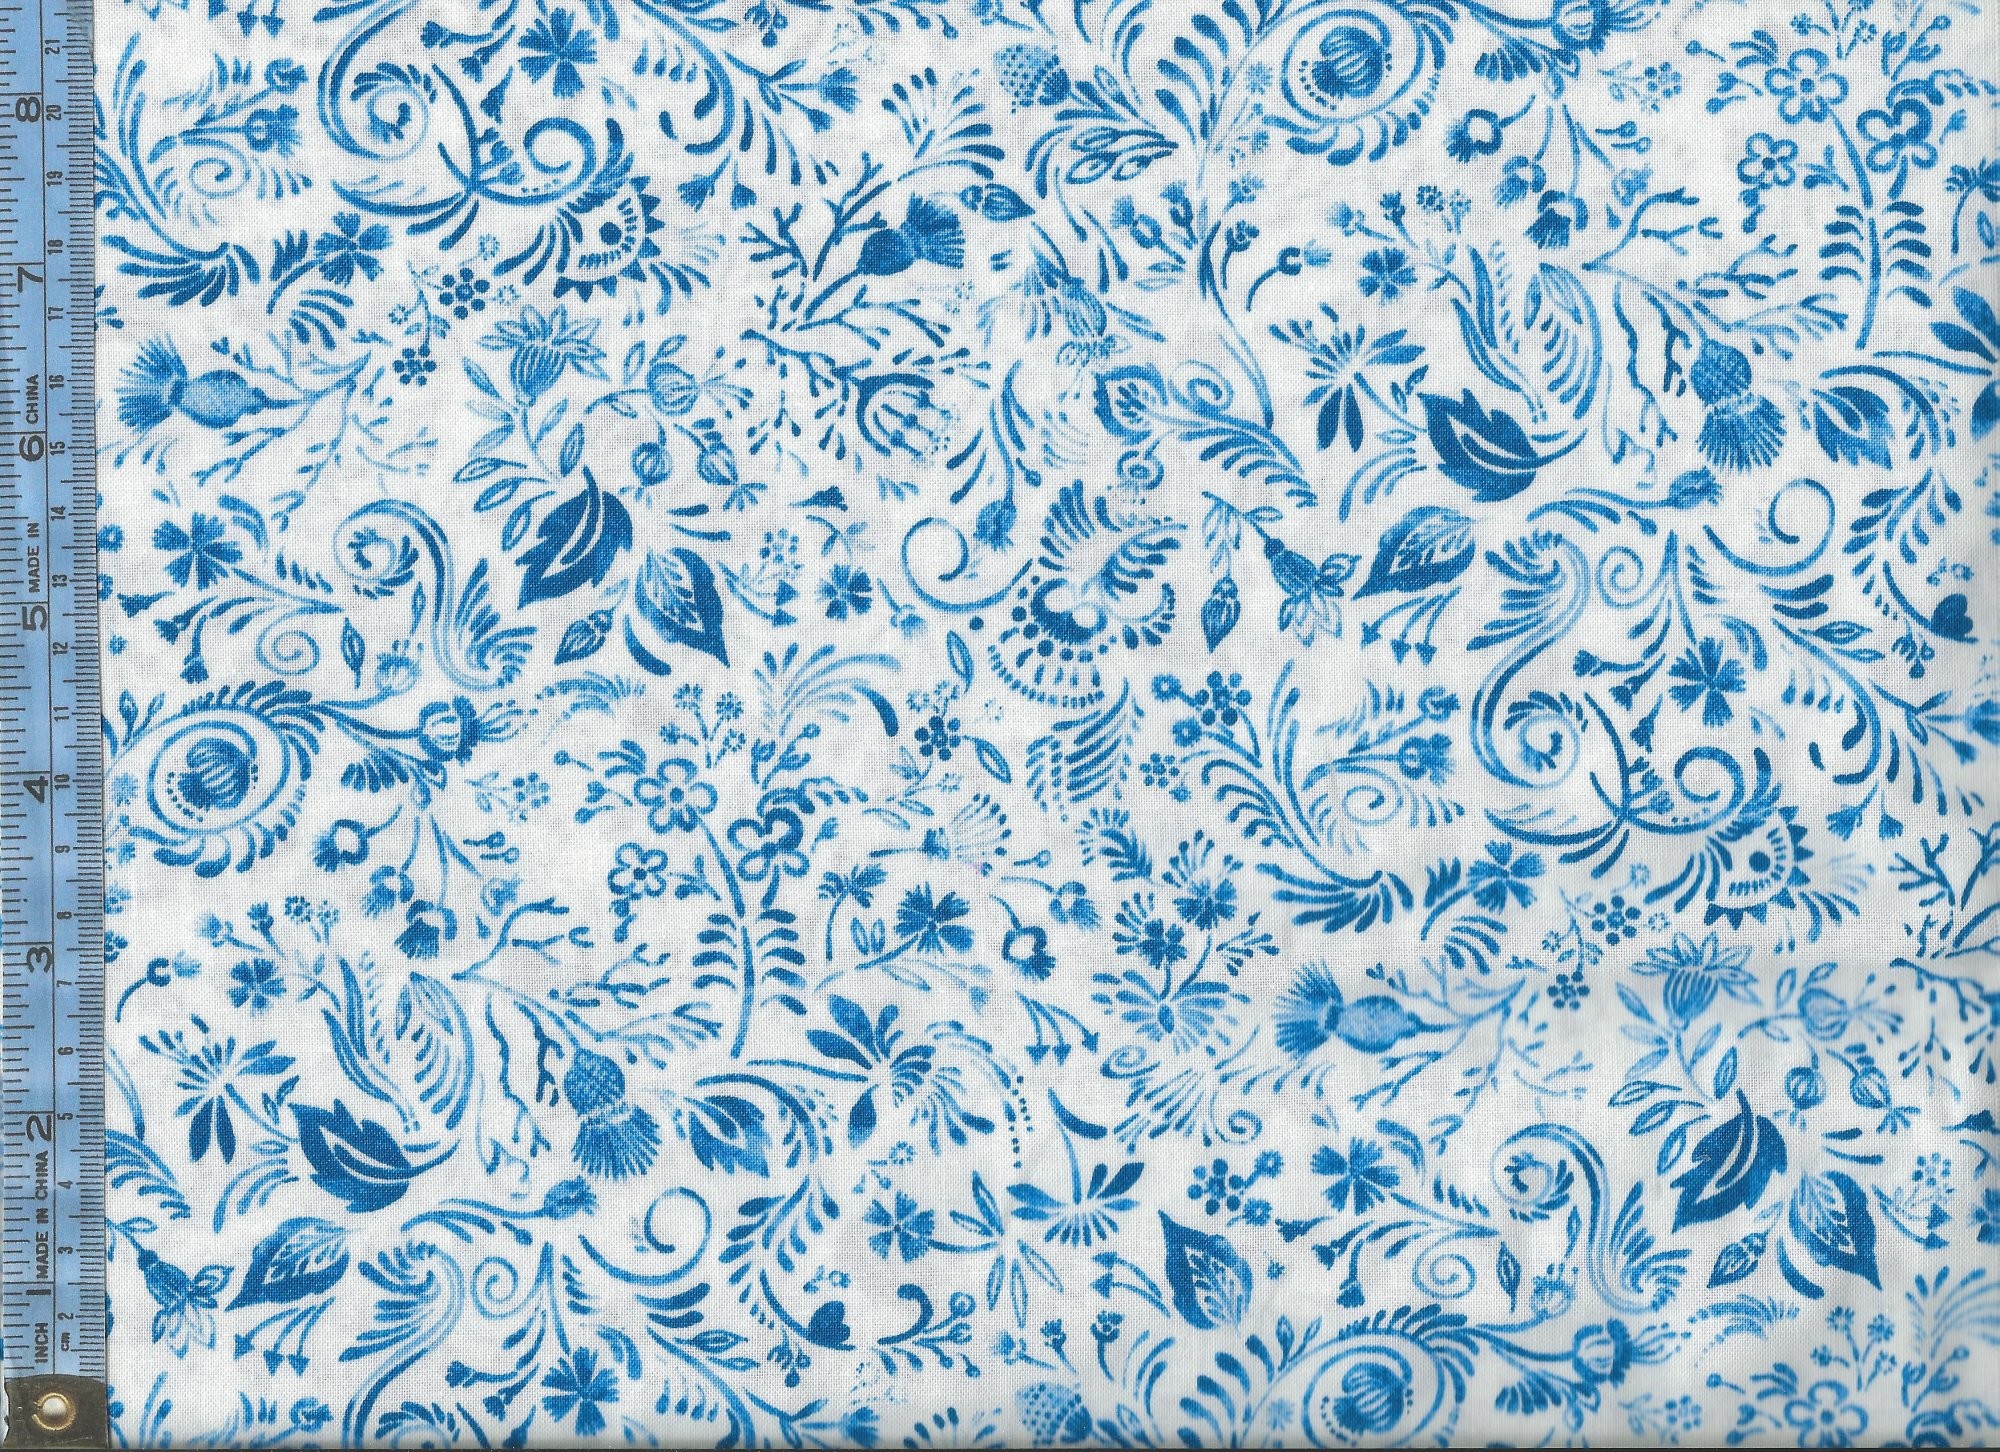 2000x1452 Flow Blue Garden - navy blue floral and leaves on white background